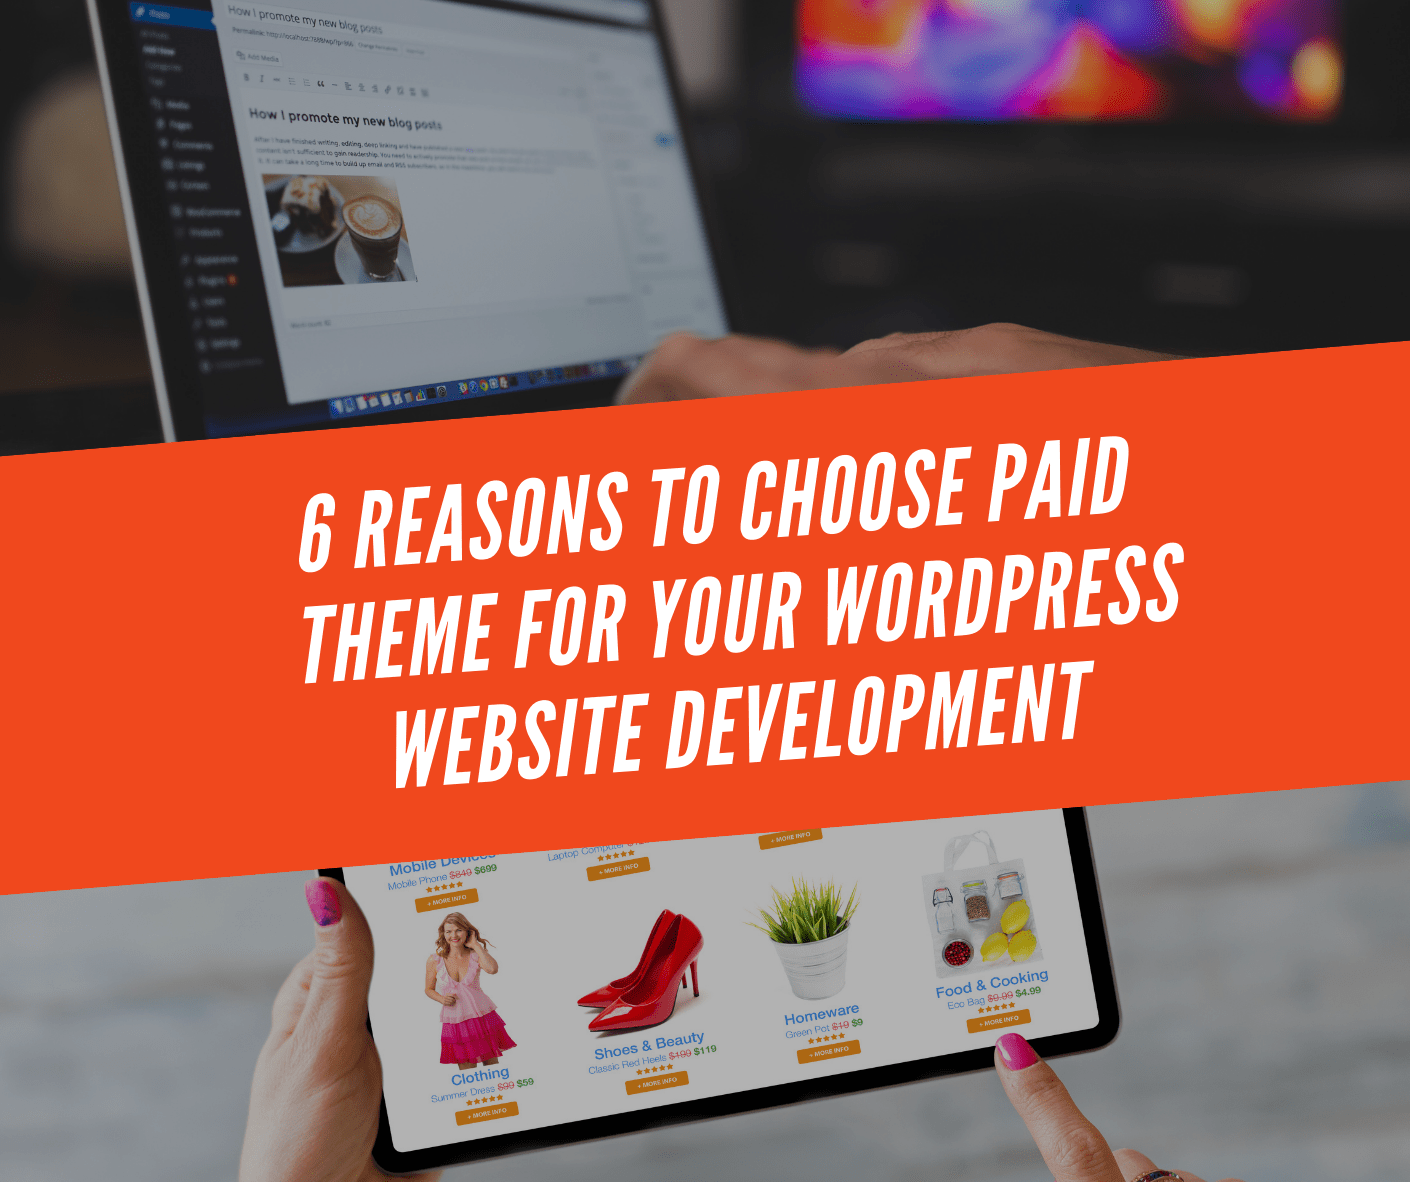 6 Reasons to choose paid theme for your WordPress website development